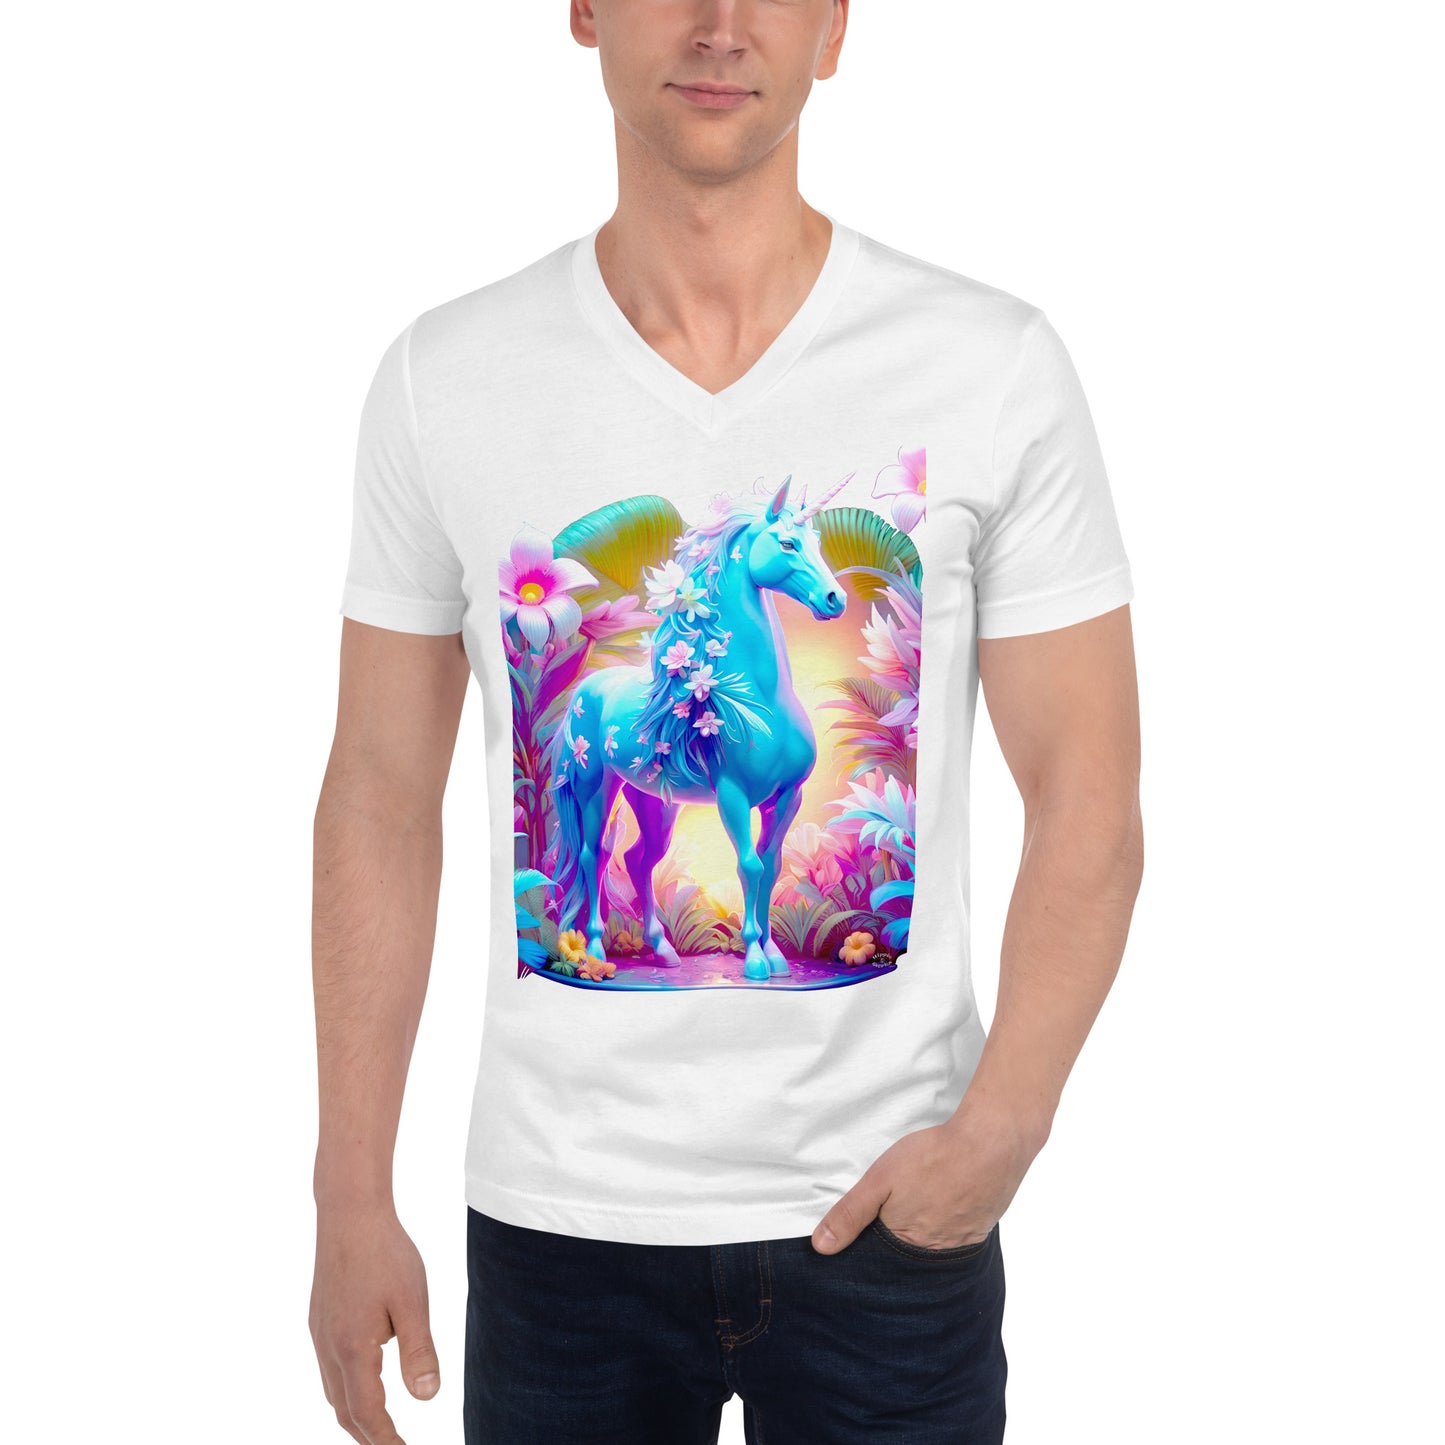 A picture of a man wearing a tshirt with a brightly colored unicorn surrounded by a colorful garden - Jungle Unicorn Unisex Short Sleeve V-Neck TShirt Media - ft - white